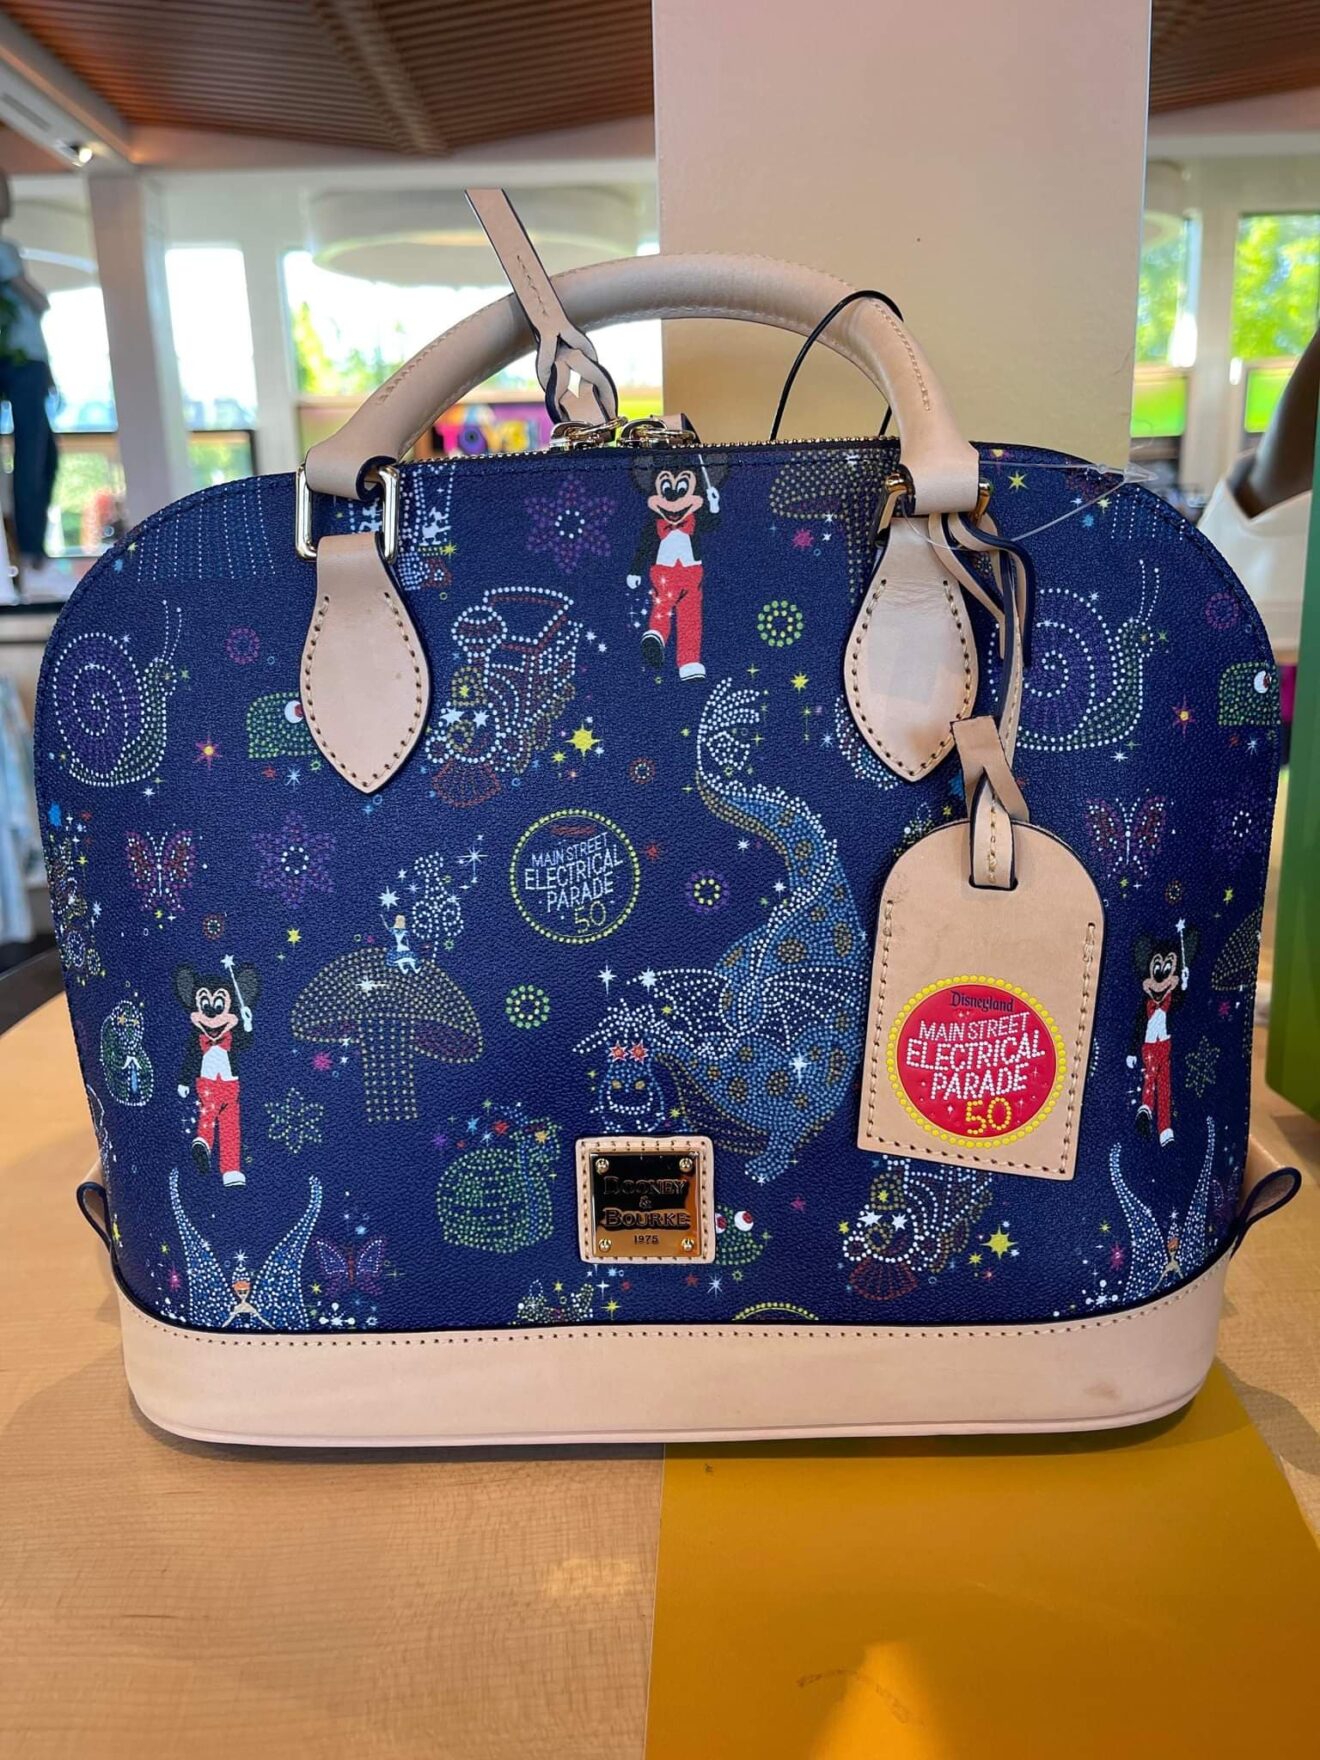 Main Street Electrical Parade Dooney & Bourke Collection Now on ...